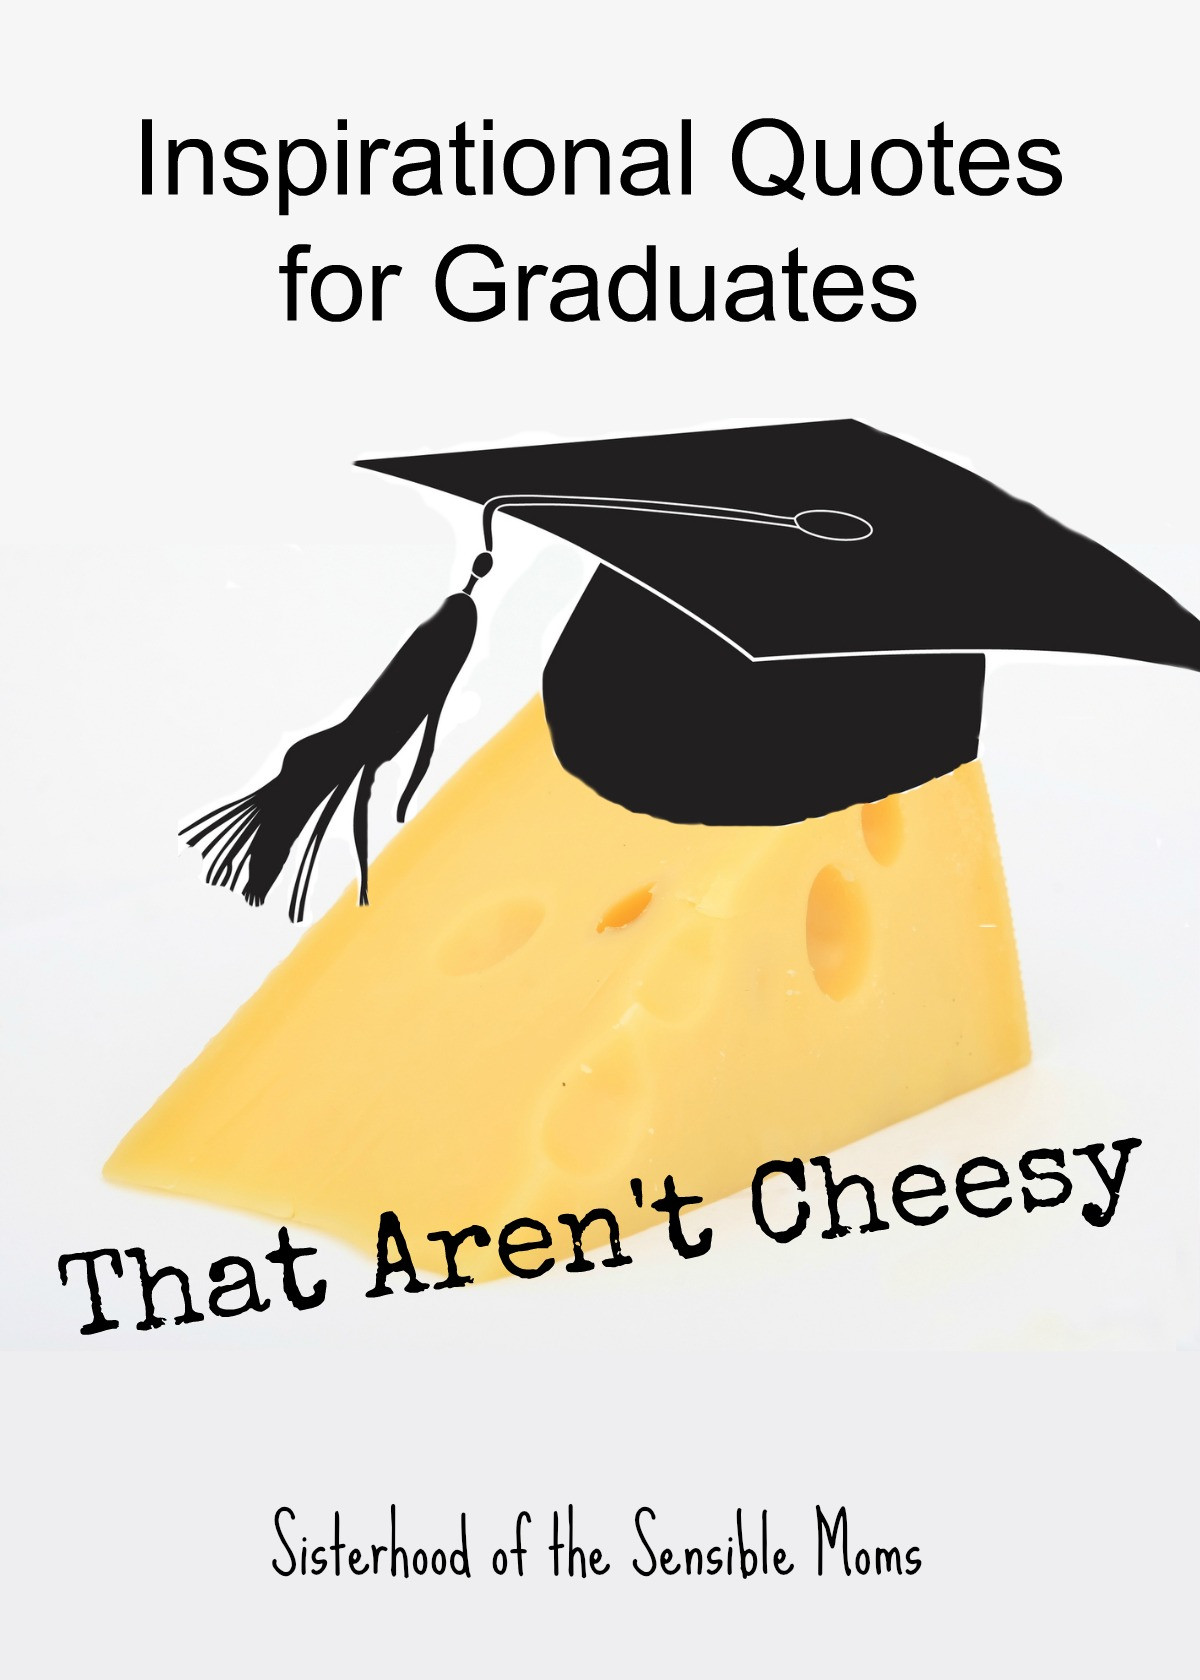 Graduation Motivational Quotes
 Inspirational Quotes for Graduates That Aren t Cheesy